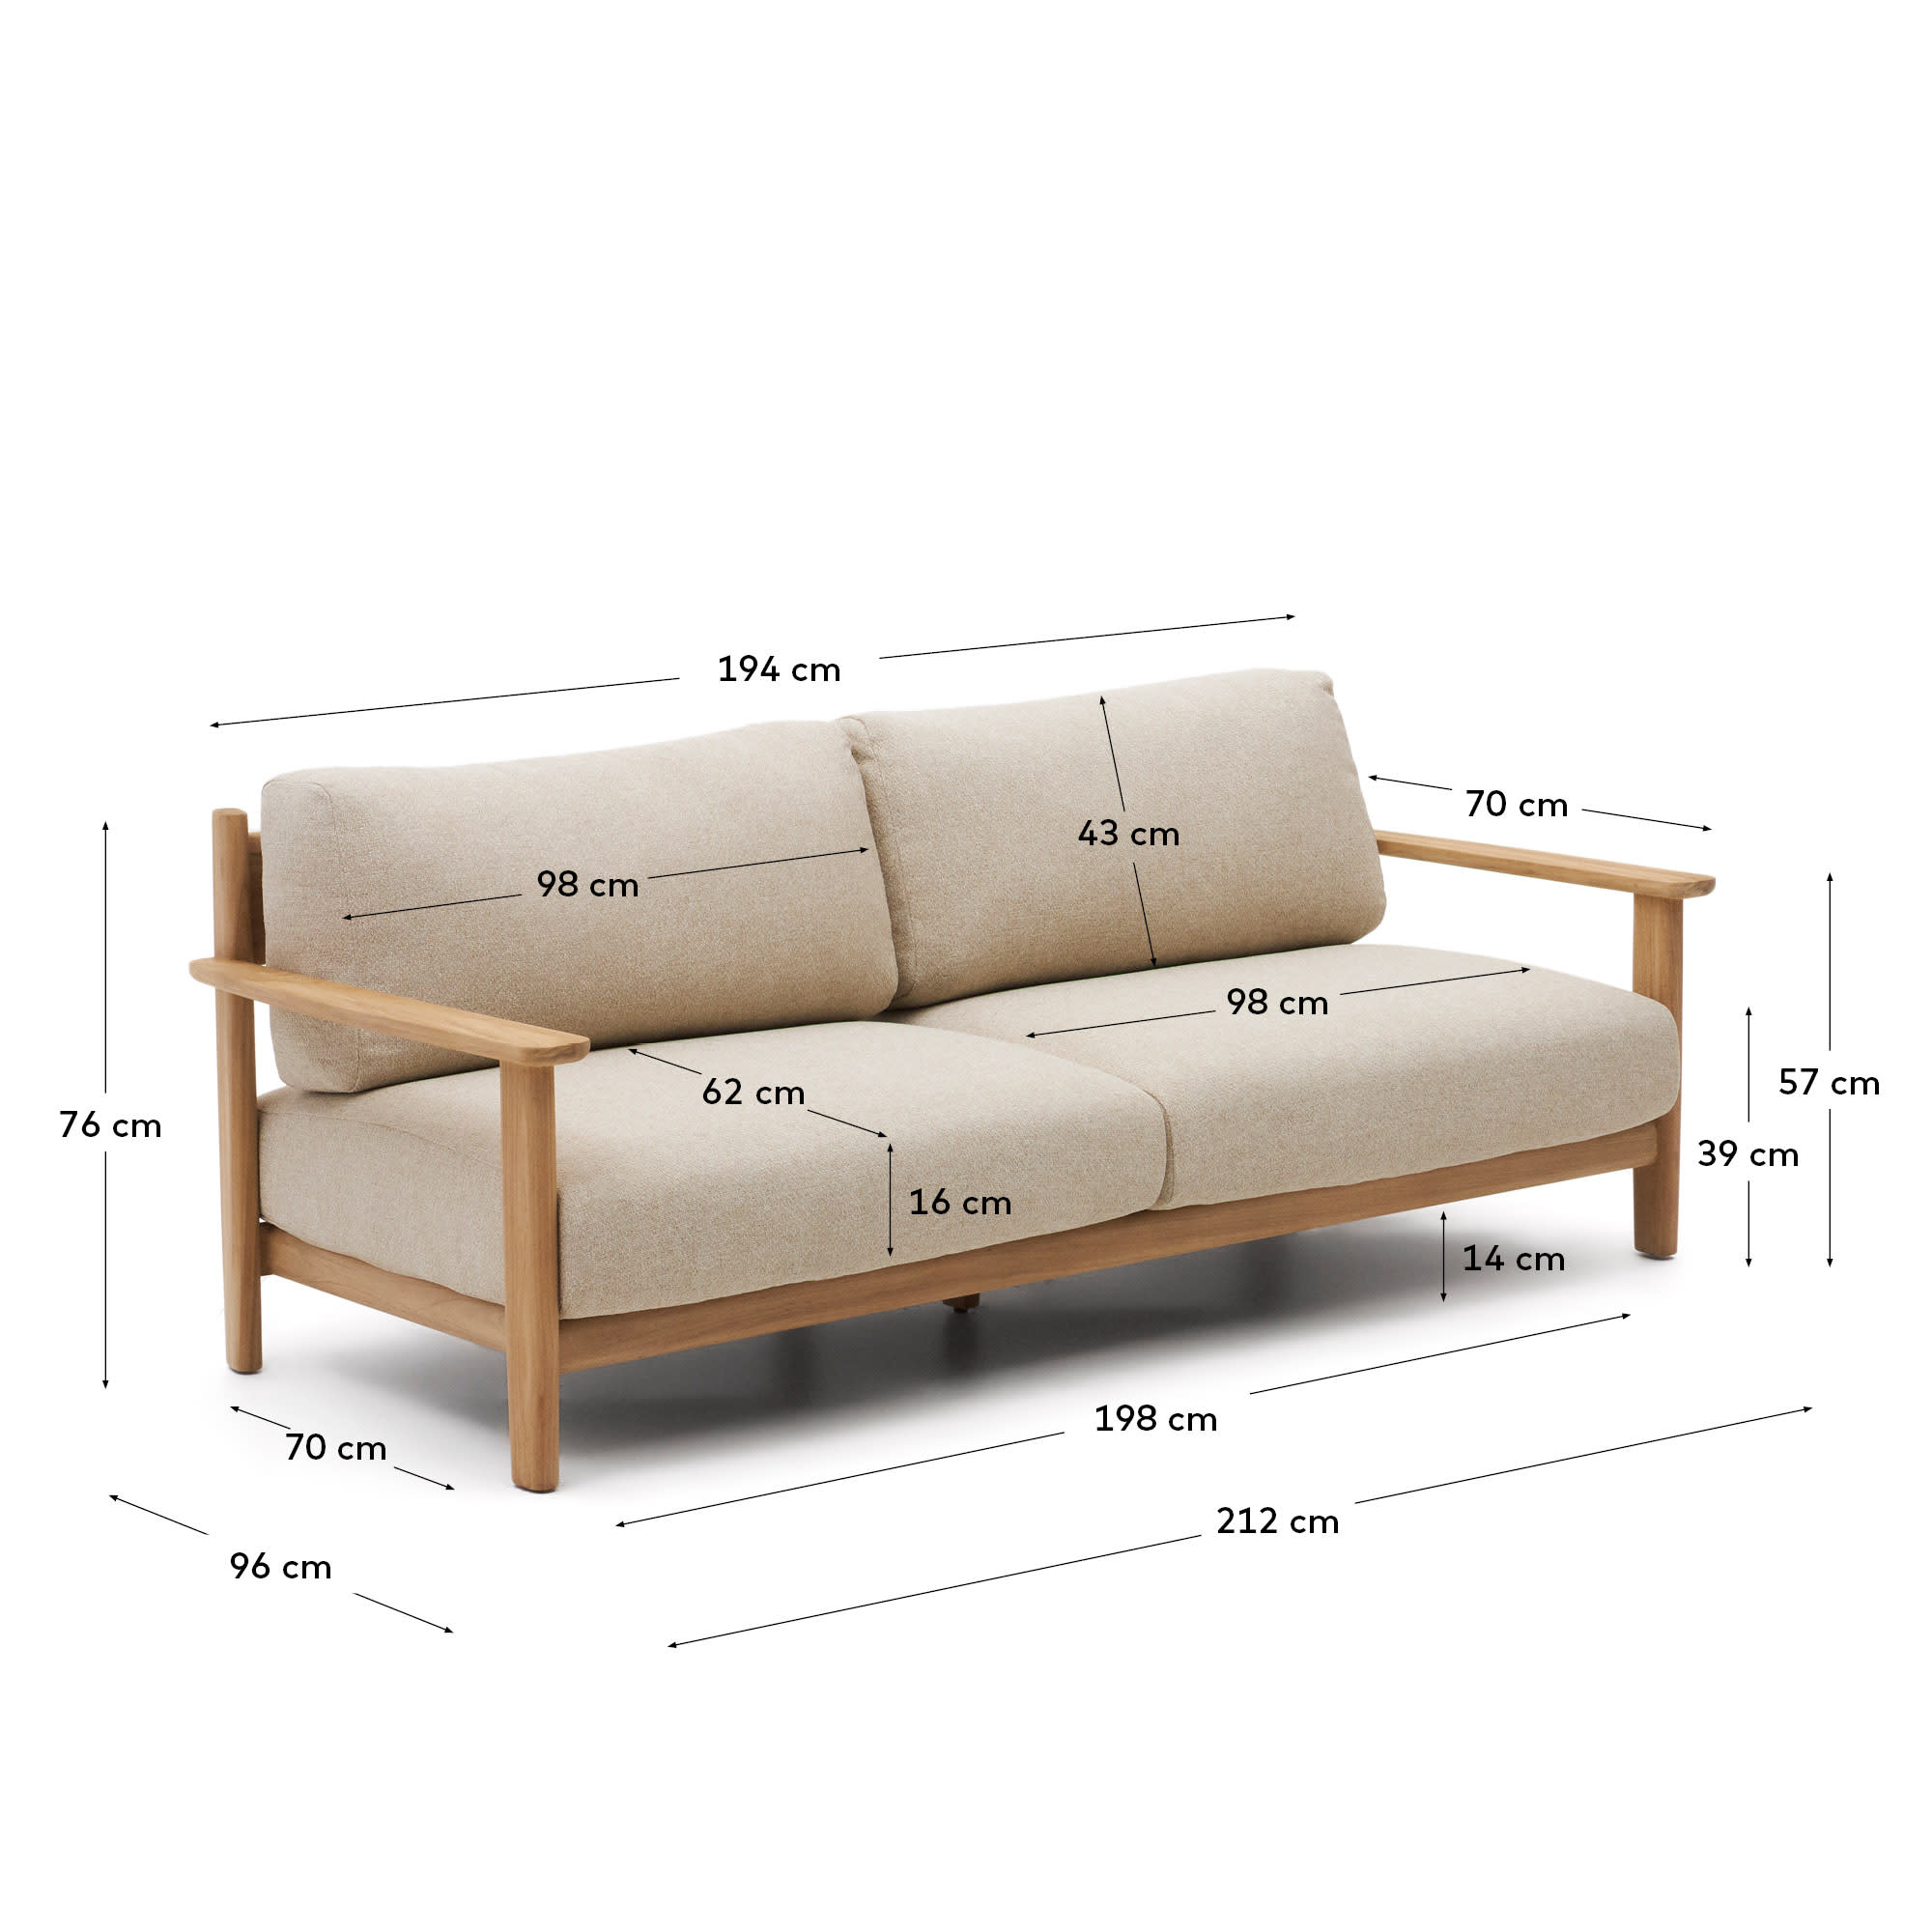 Tirant 3-seater sofa made from solid teak wood 212 cm 100% FSC - sizes